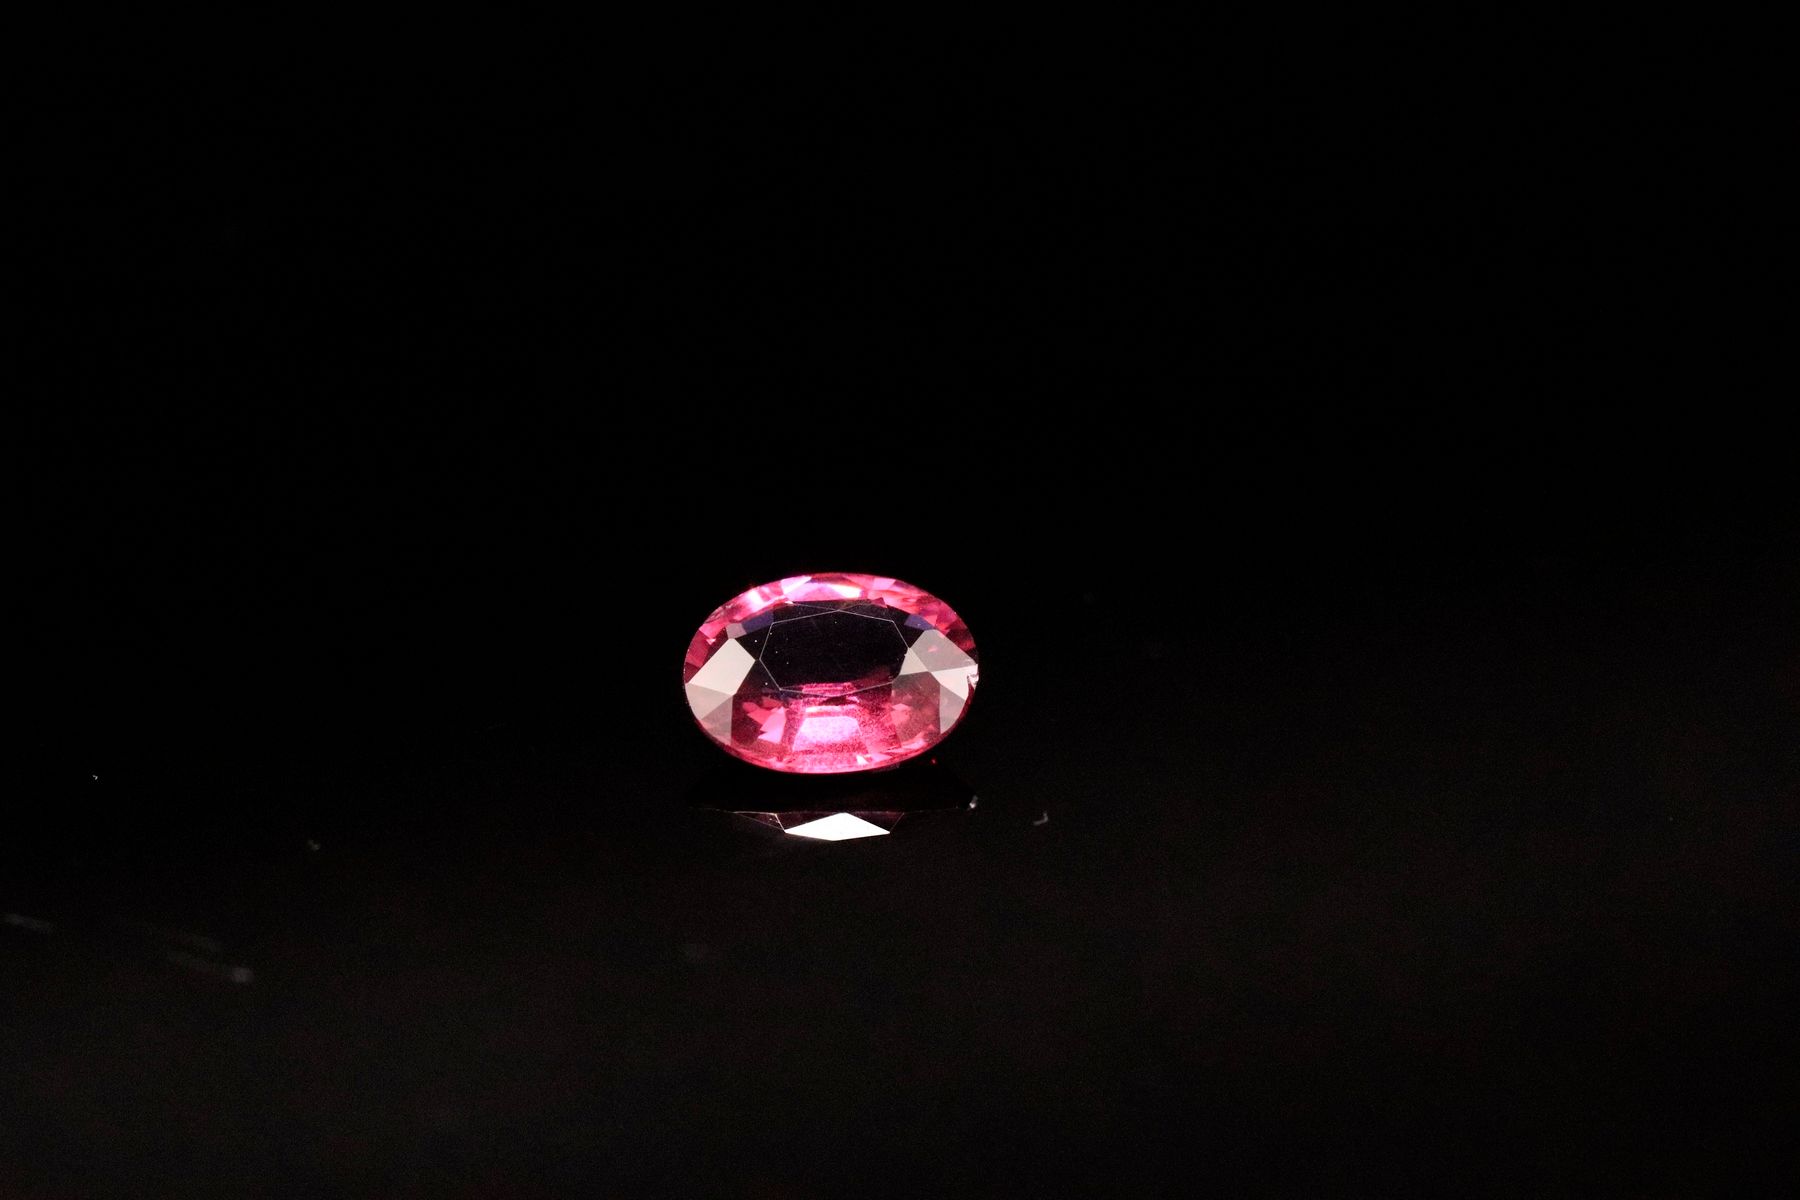 Null Oval pink garnet on paper.
Weight : 1.47 ct

Dimensions: 8.5mm x 7mm